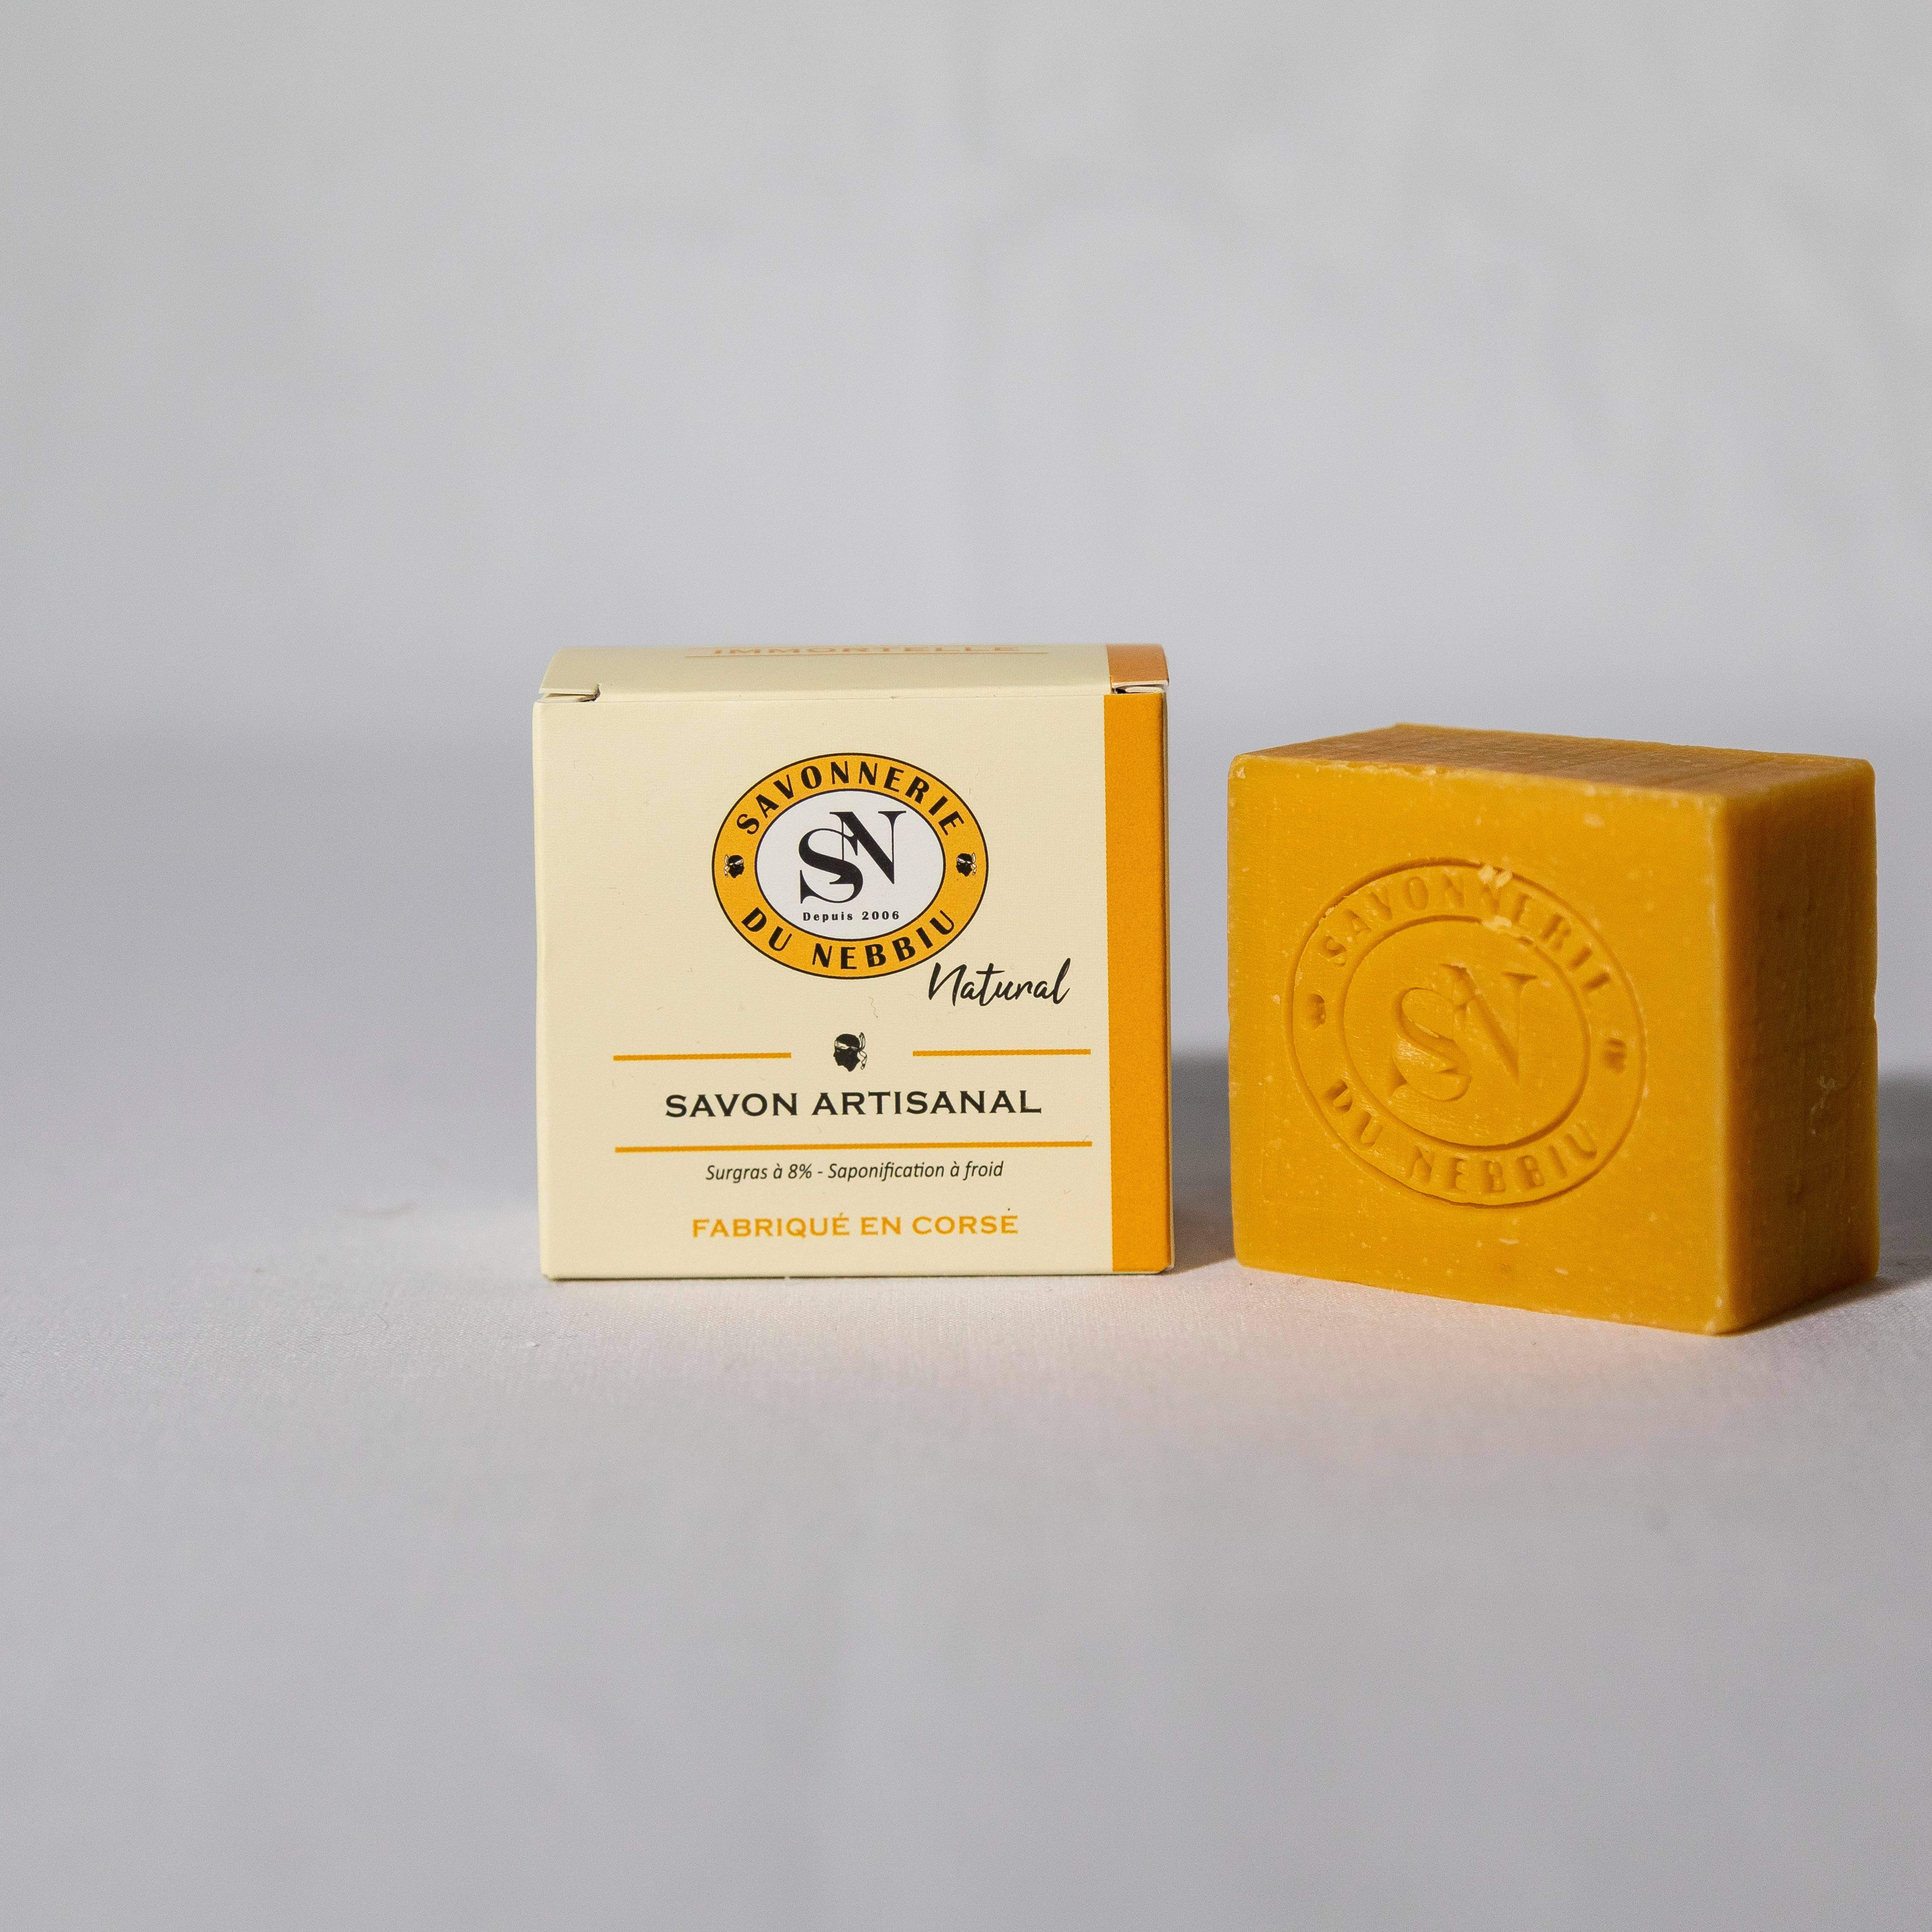 Wholesale Natural Immortelle Corsican Handmade Soap for your store - Faire